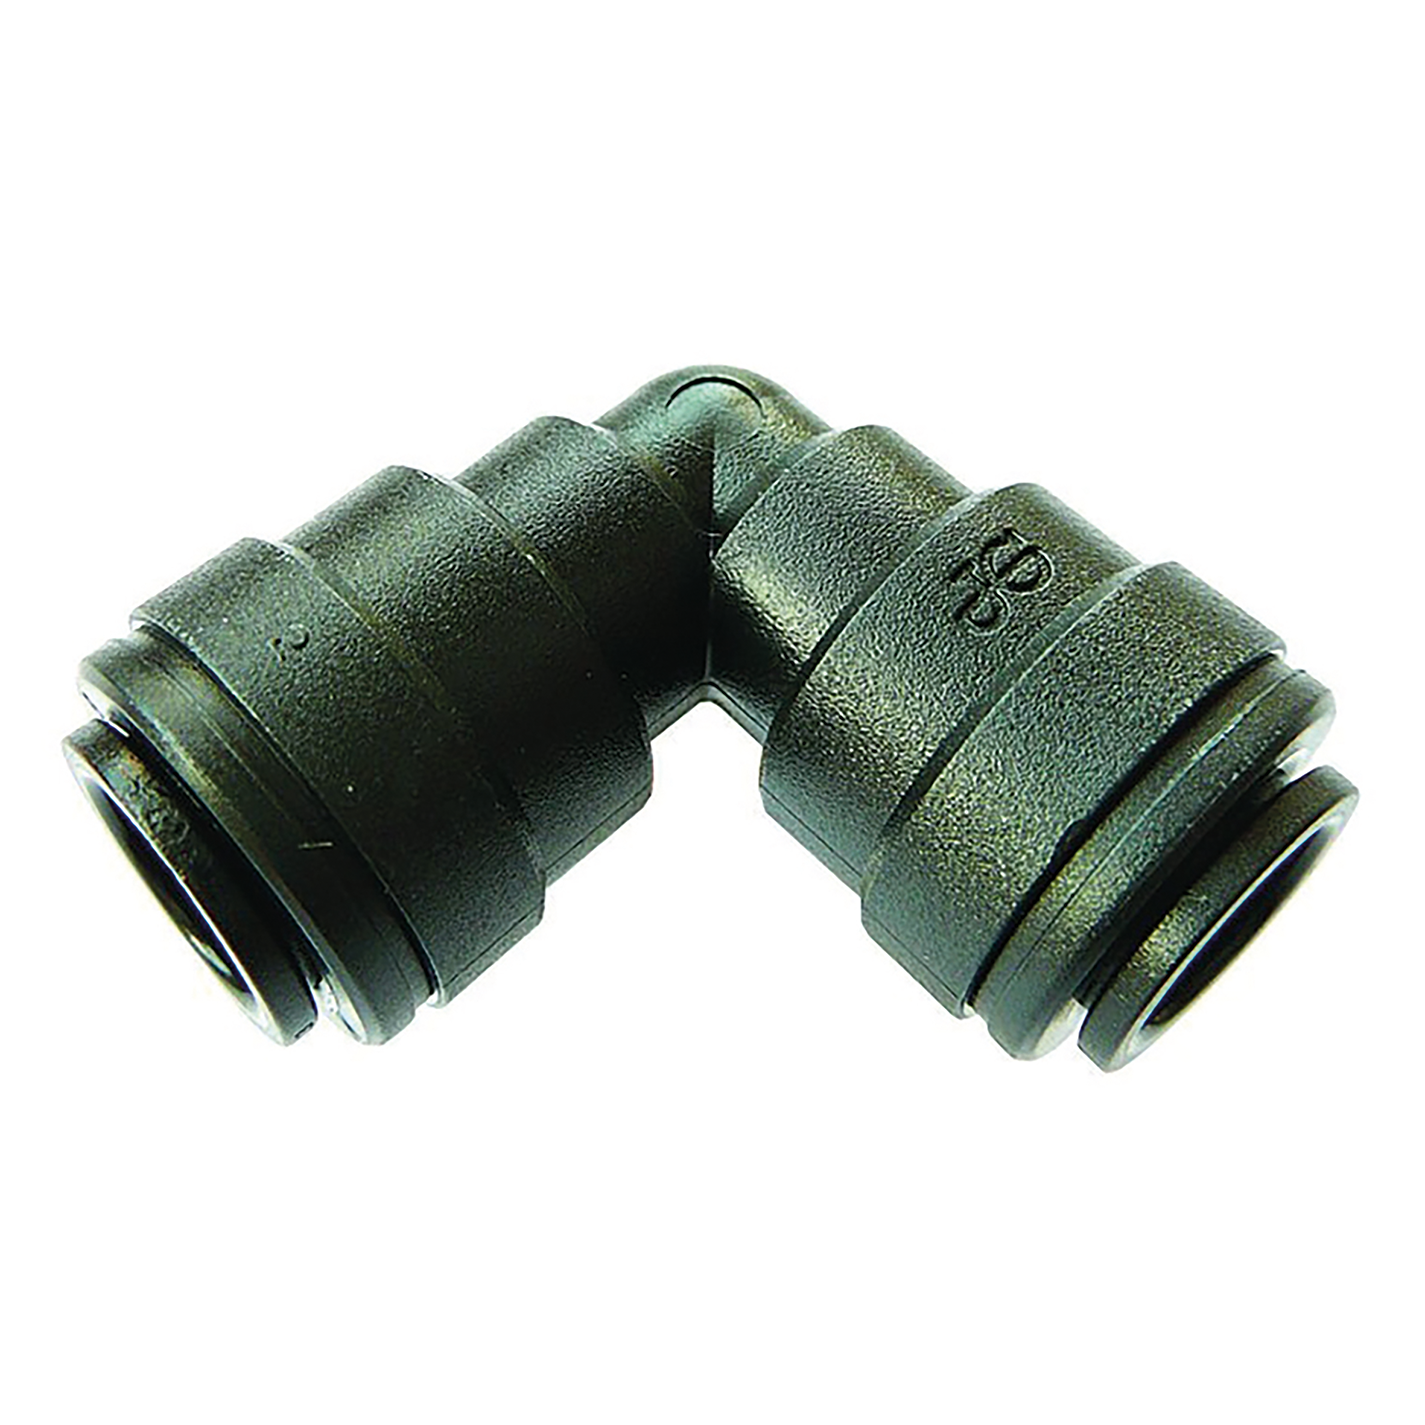 JPL10RM -10mm Tube O/D - Elbow Connector - Equal